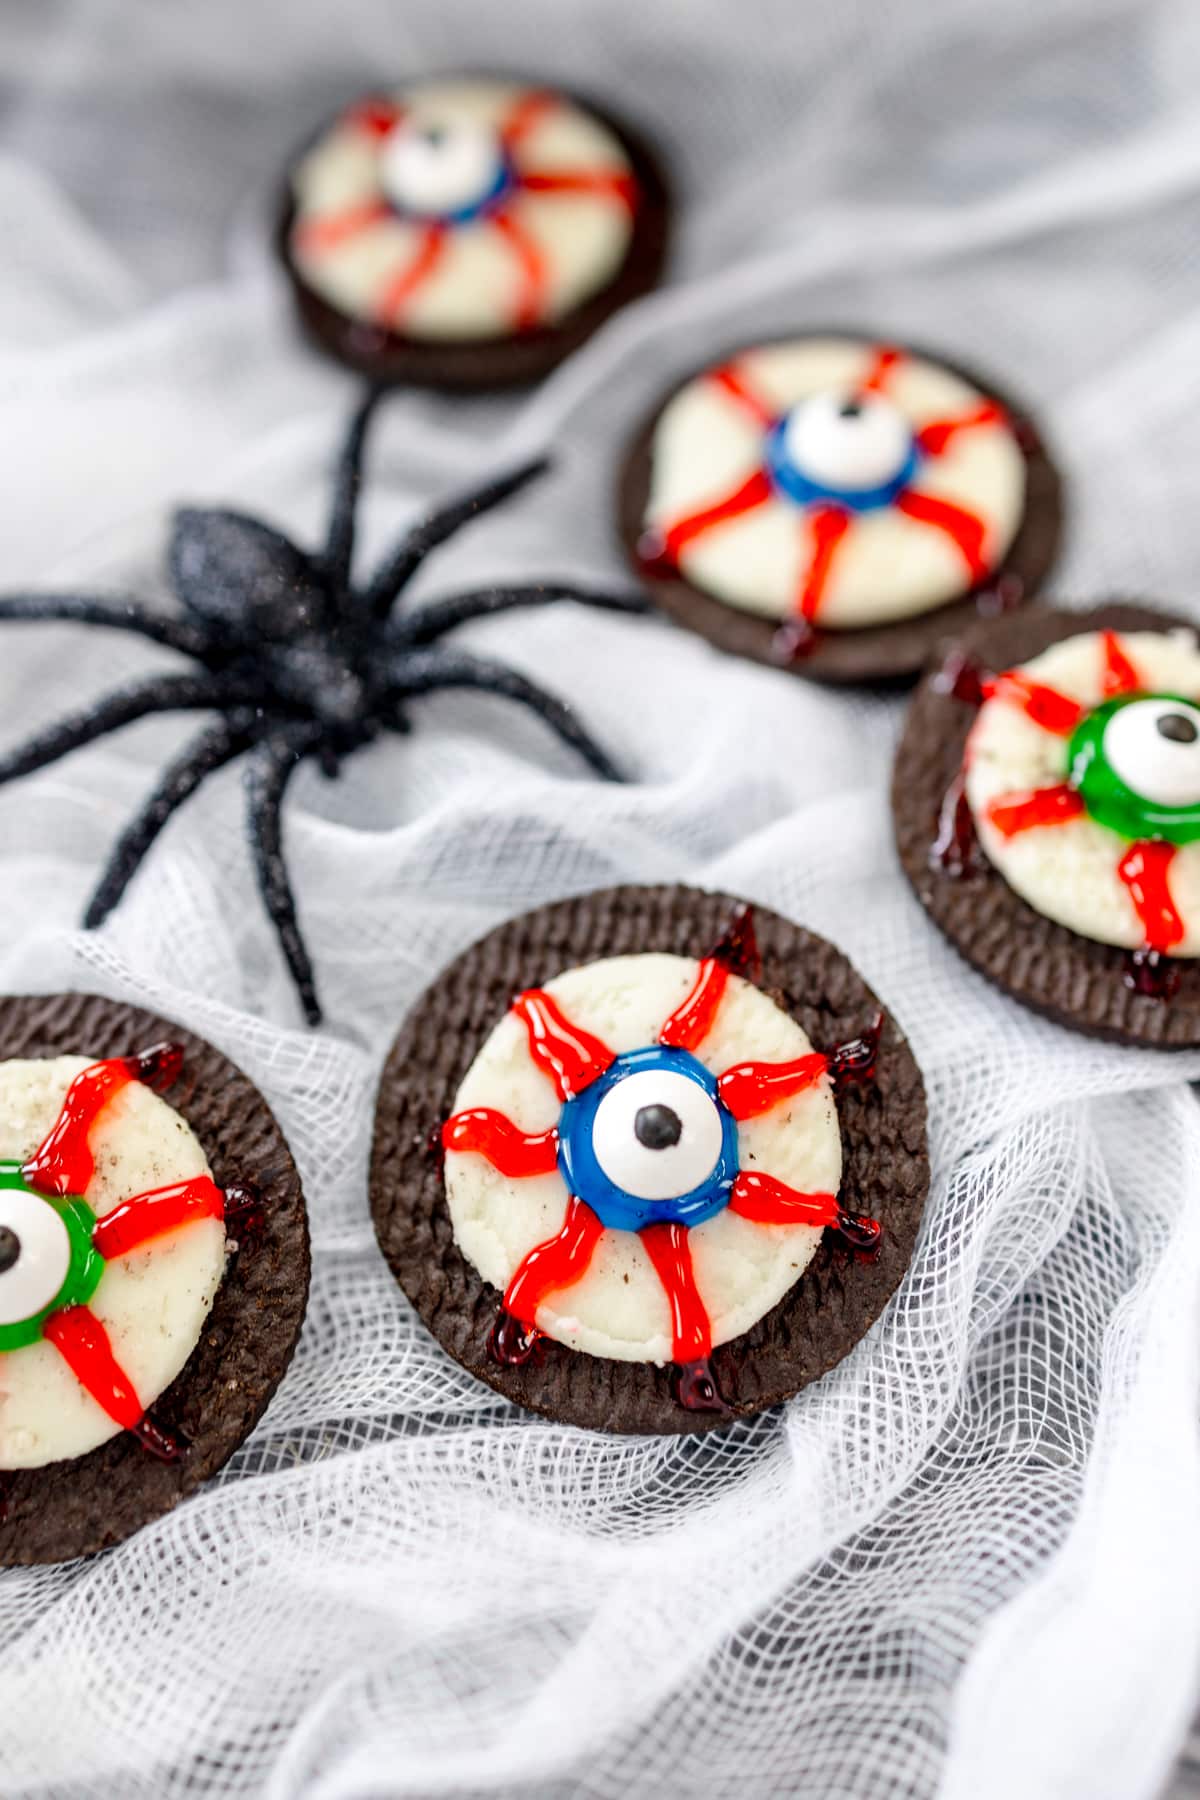 Top view of eyeball cookies next to a plastic spider.